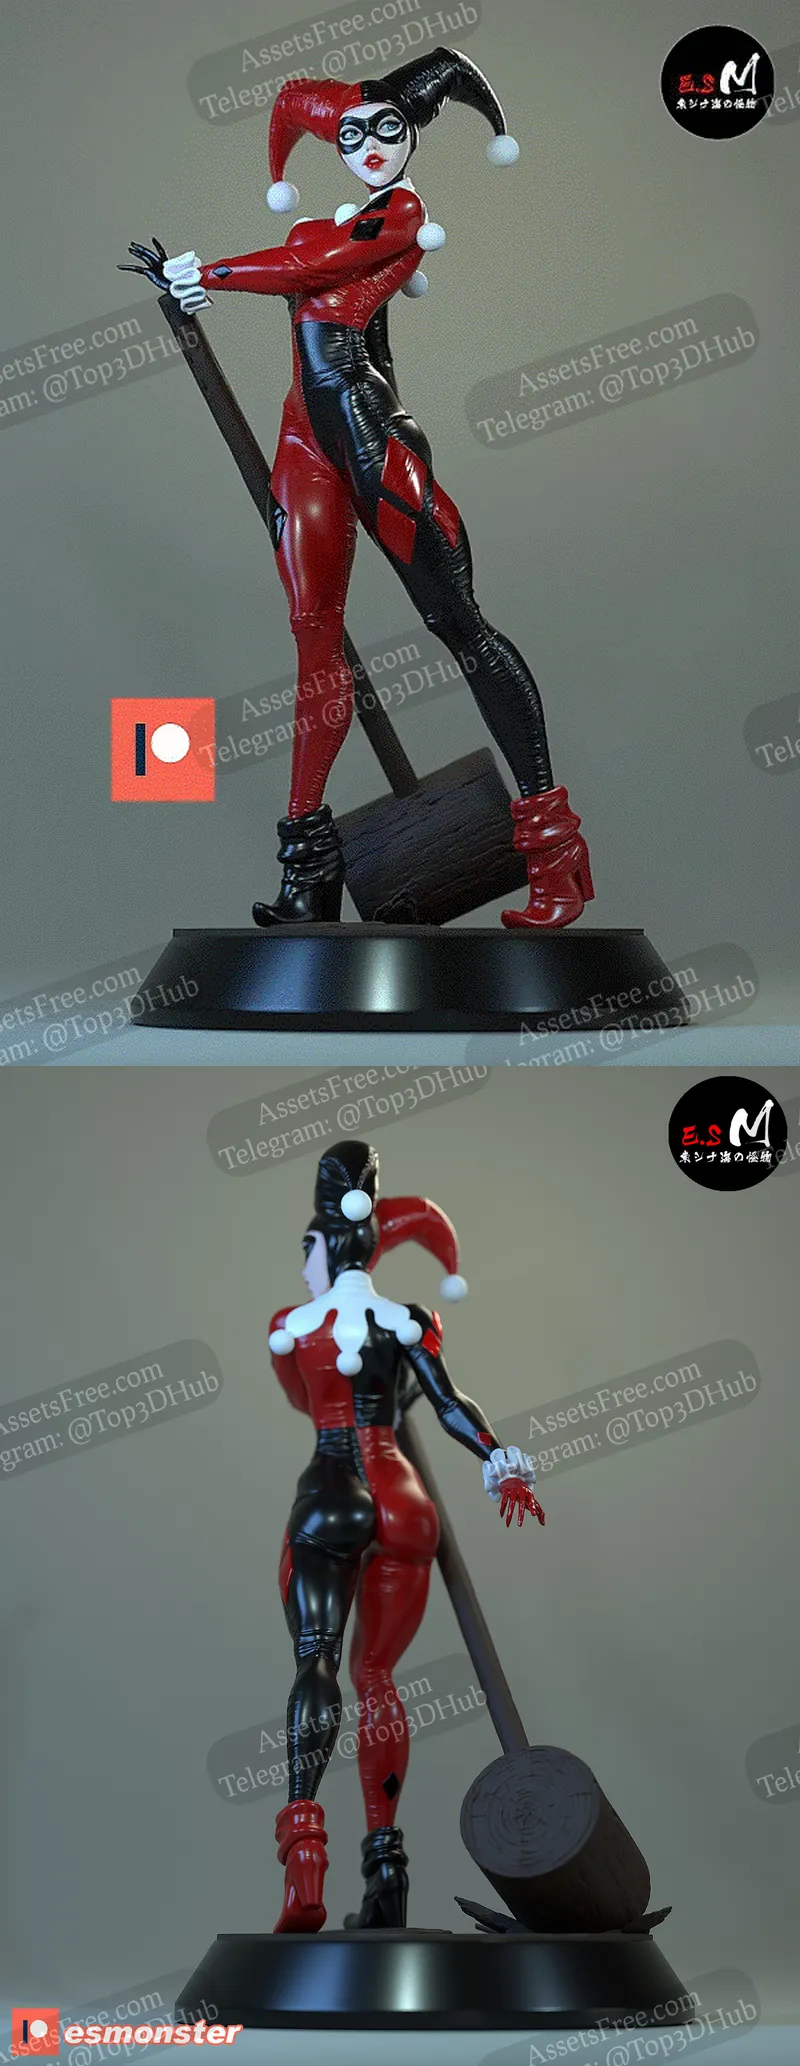 Embrace Chaos with Harley Quinn: A Playful 3D Model Tribute